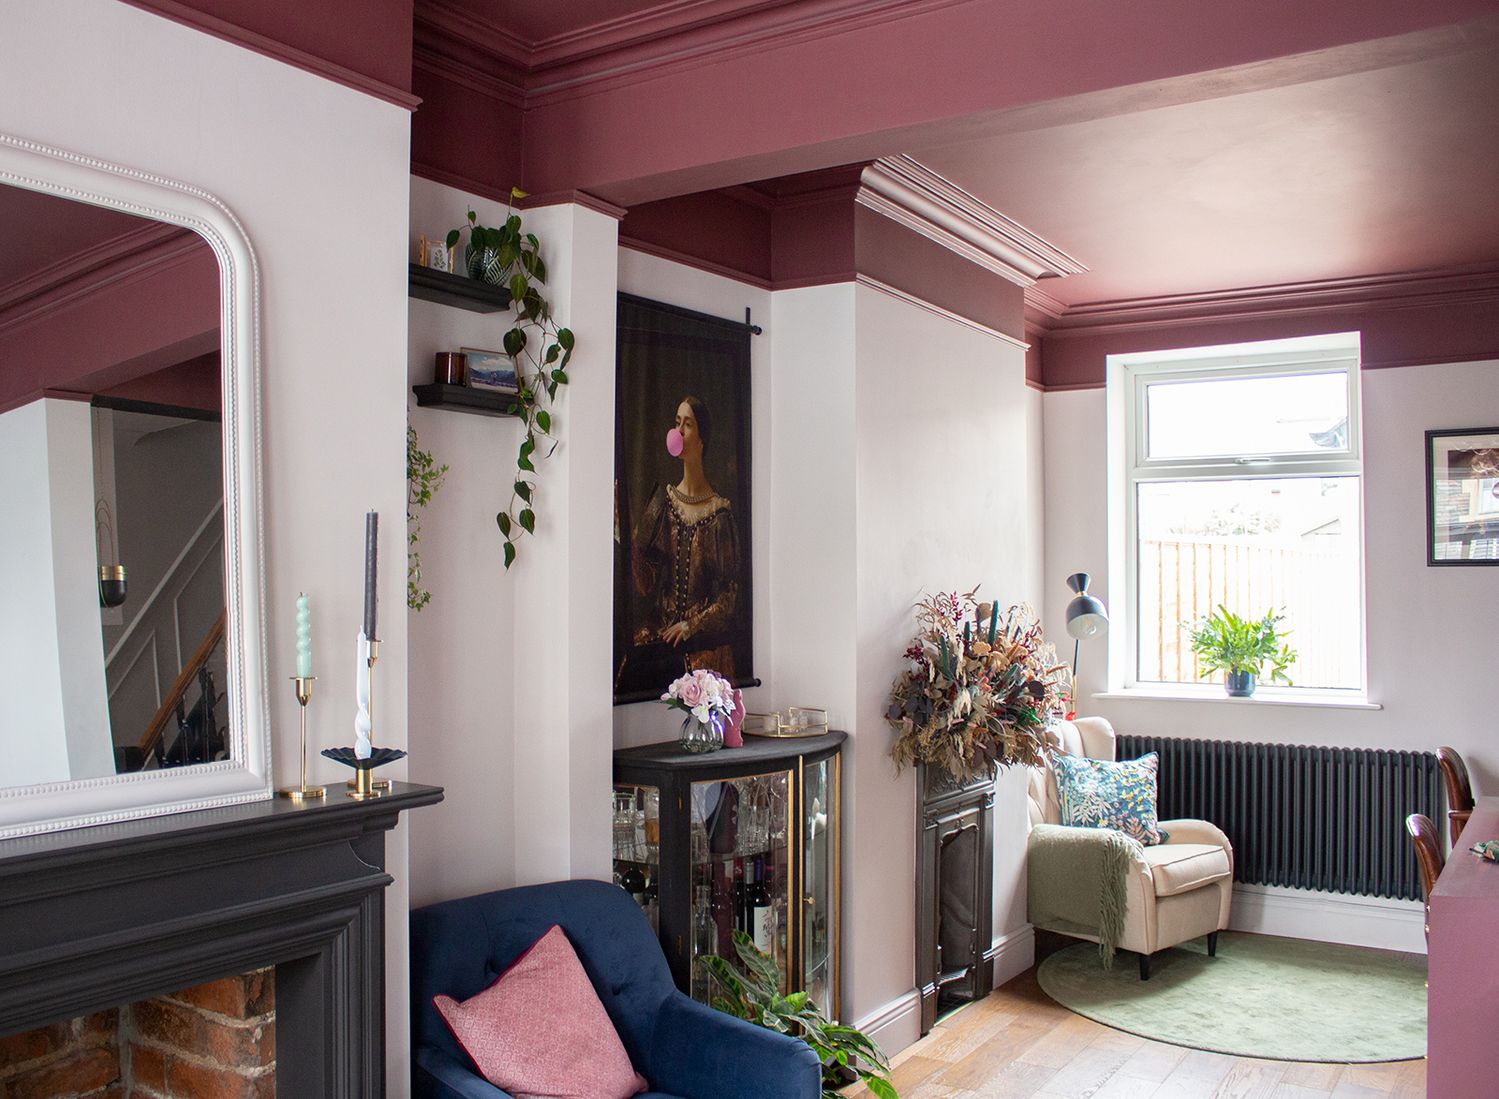 A photo showing the two chimney breasts and fireplaces in the room, with the pale pink walls and burgundy ceiling.